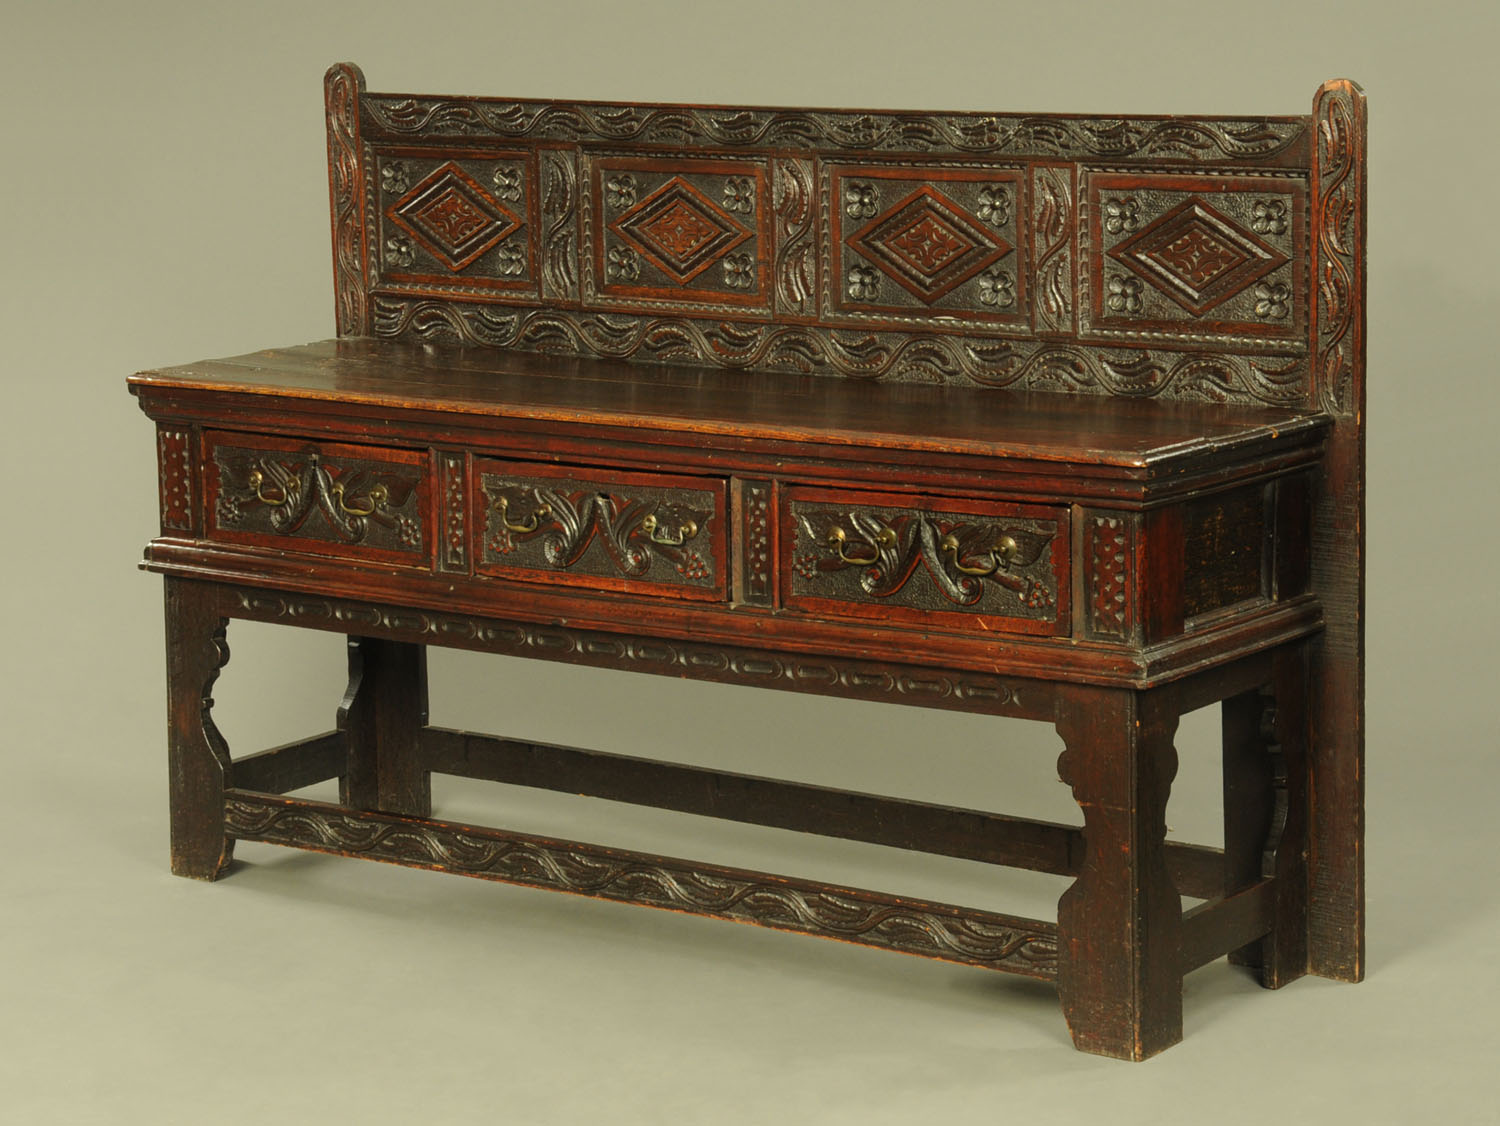 A 17th century and later dresser base,